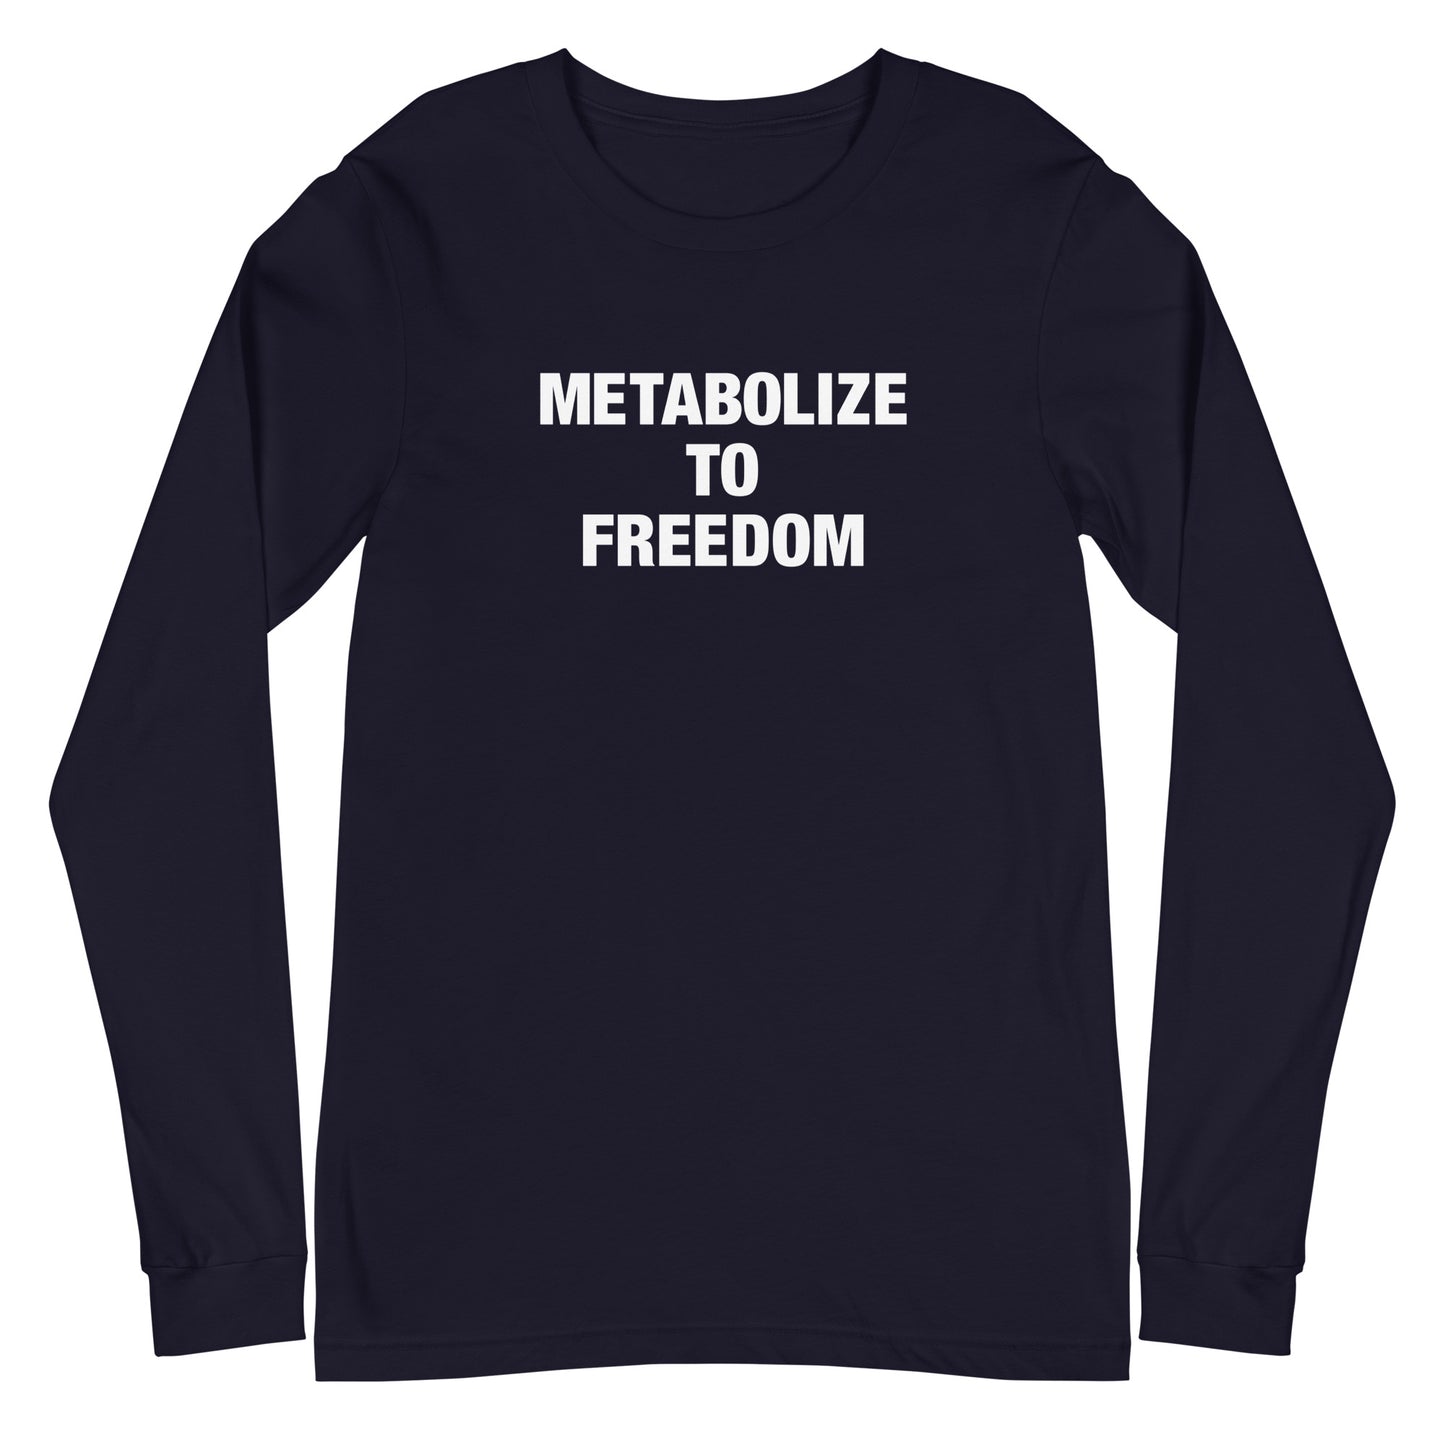 Metabolize to Freedom Long Sleeve Tee